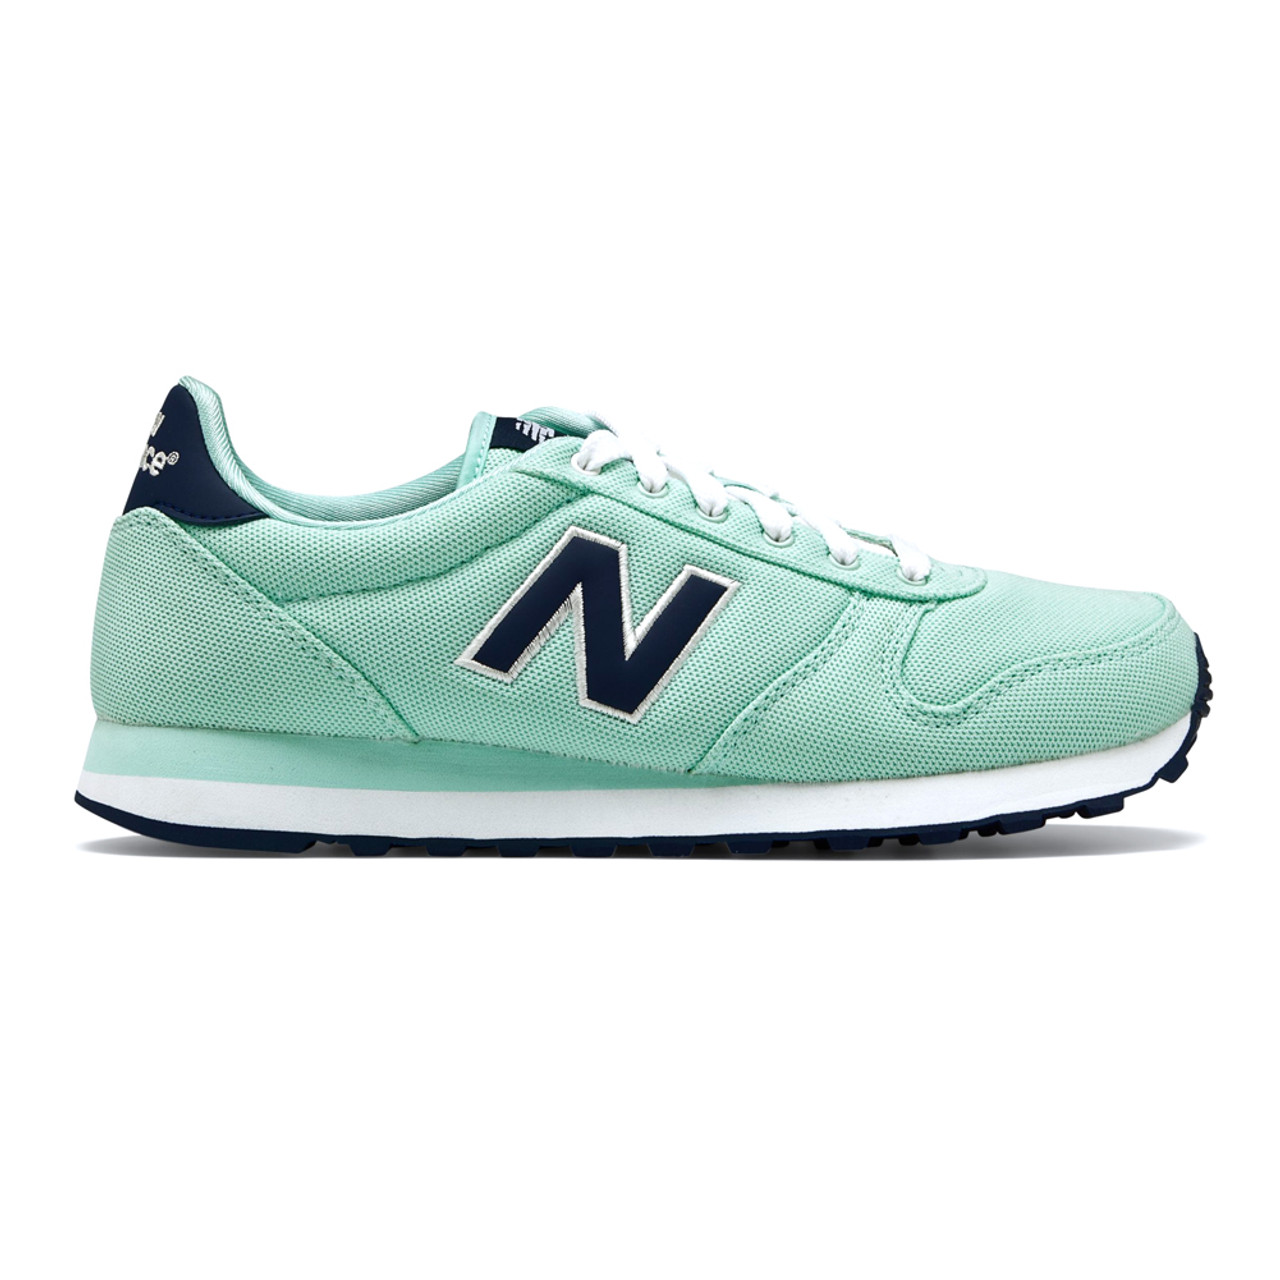 Discount New Balance Ladies Shoes 